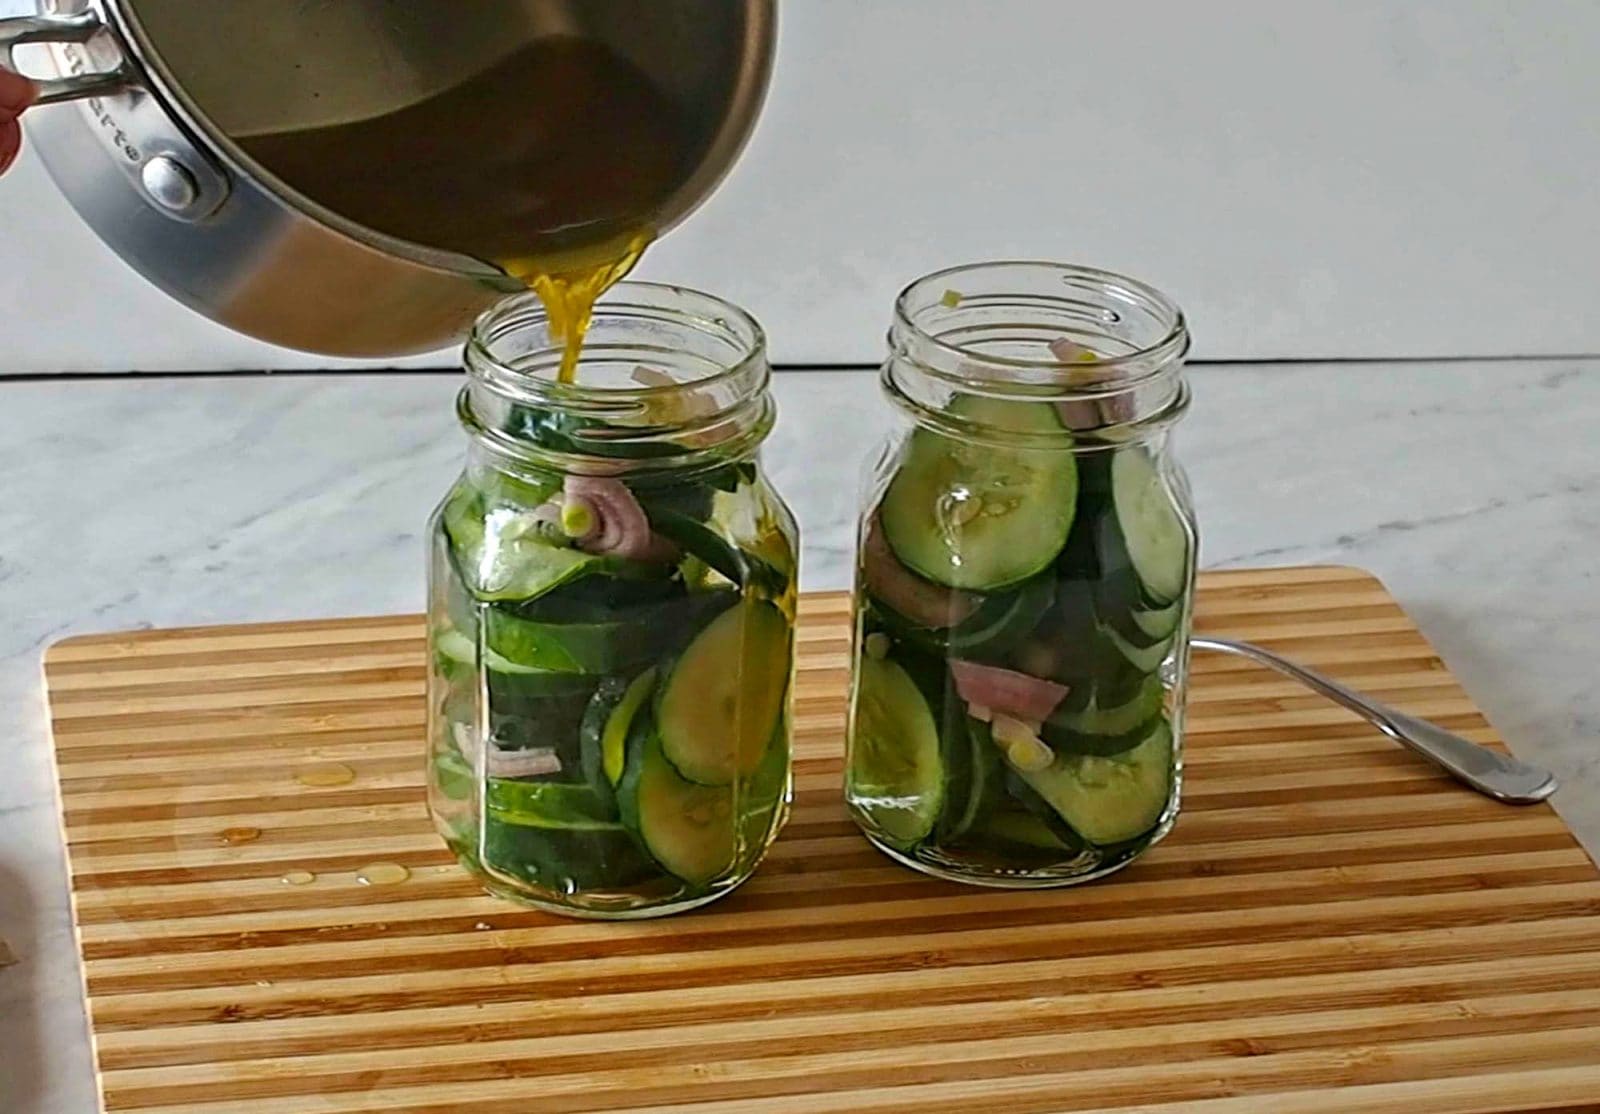 Making refrigerator bread and butter pickles by pouring brine over the cucumbers